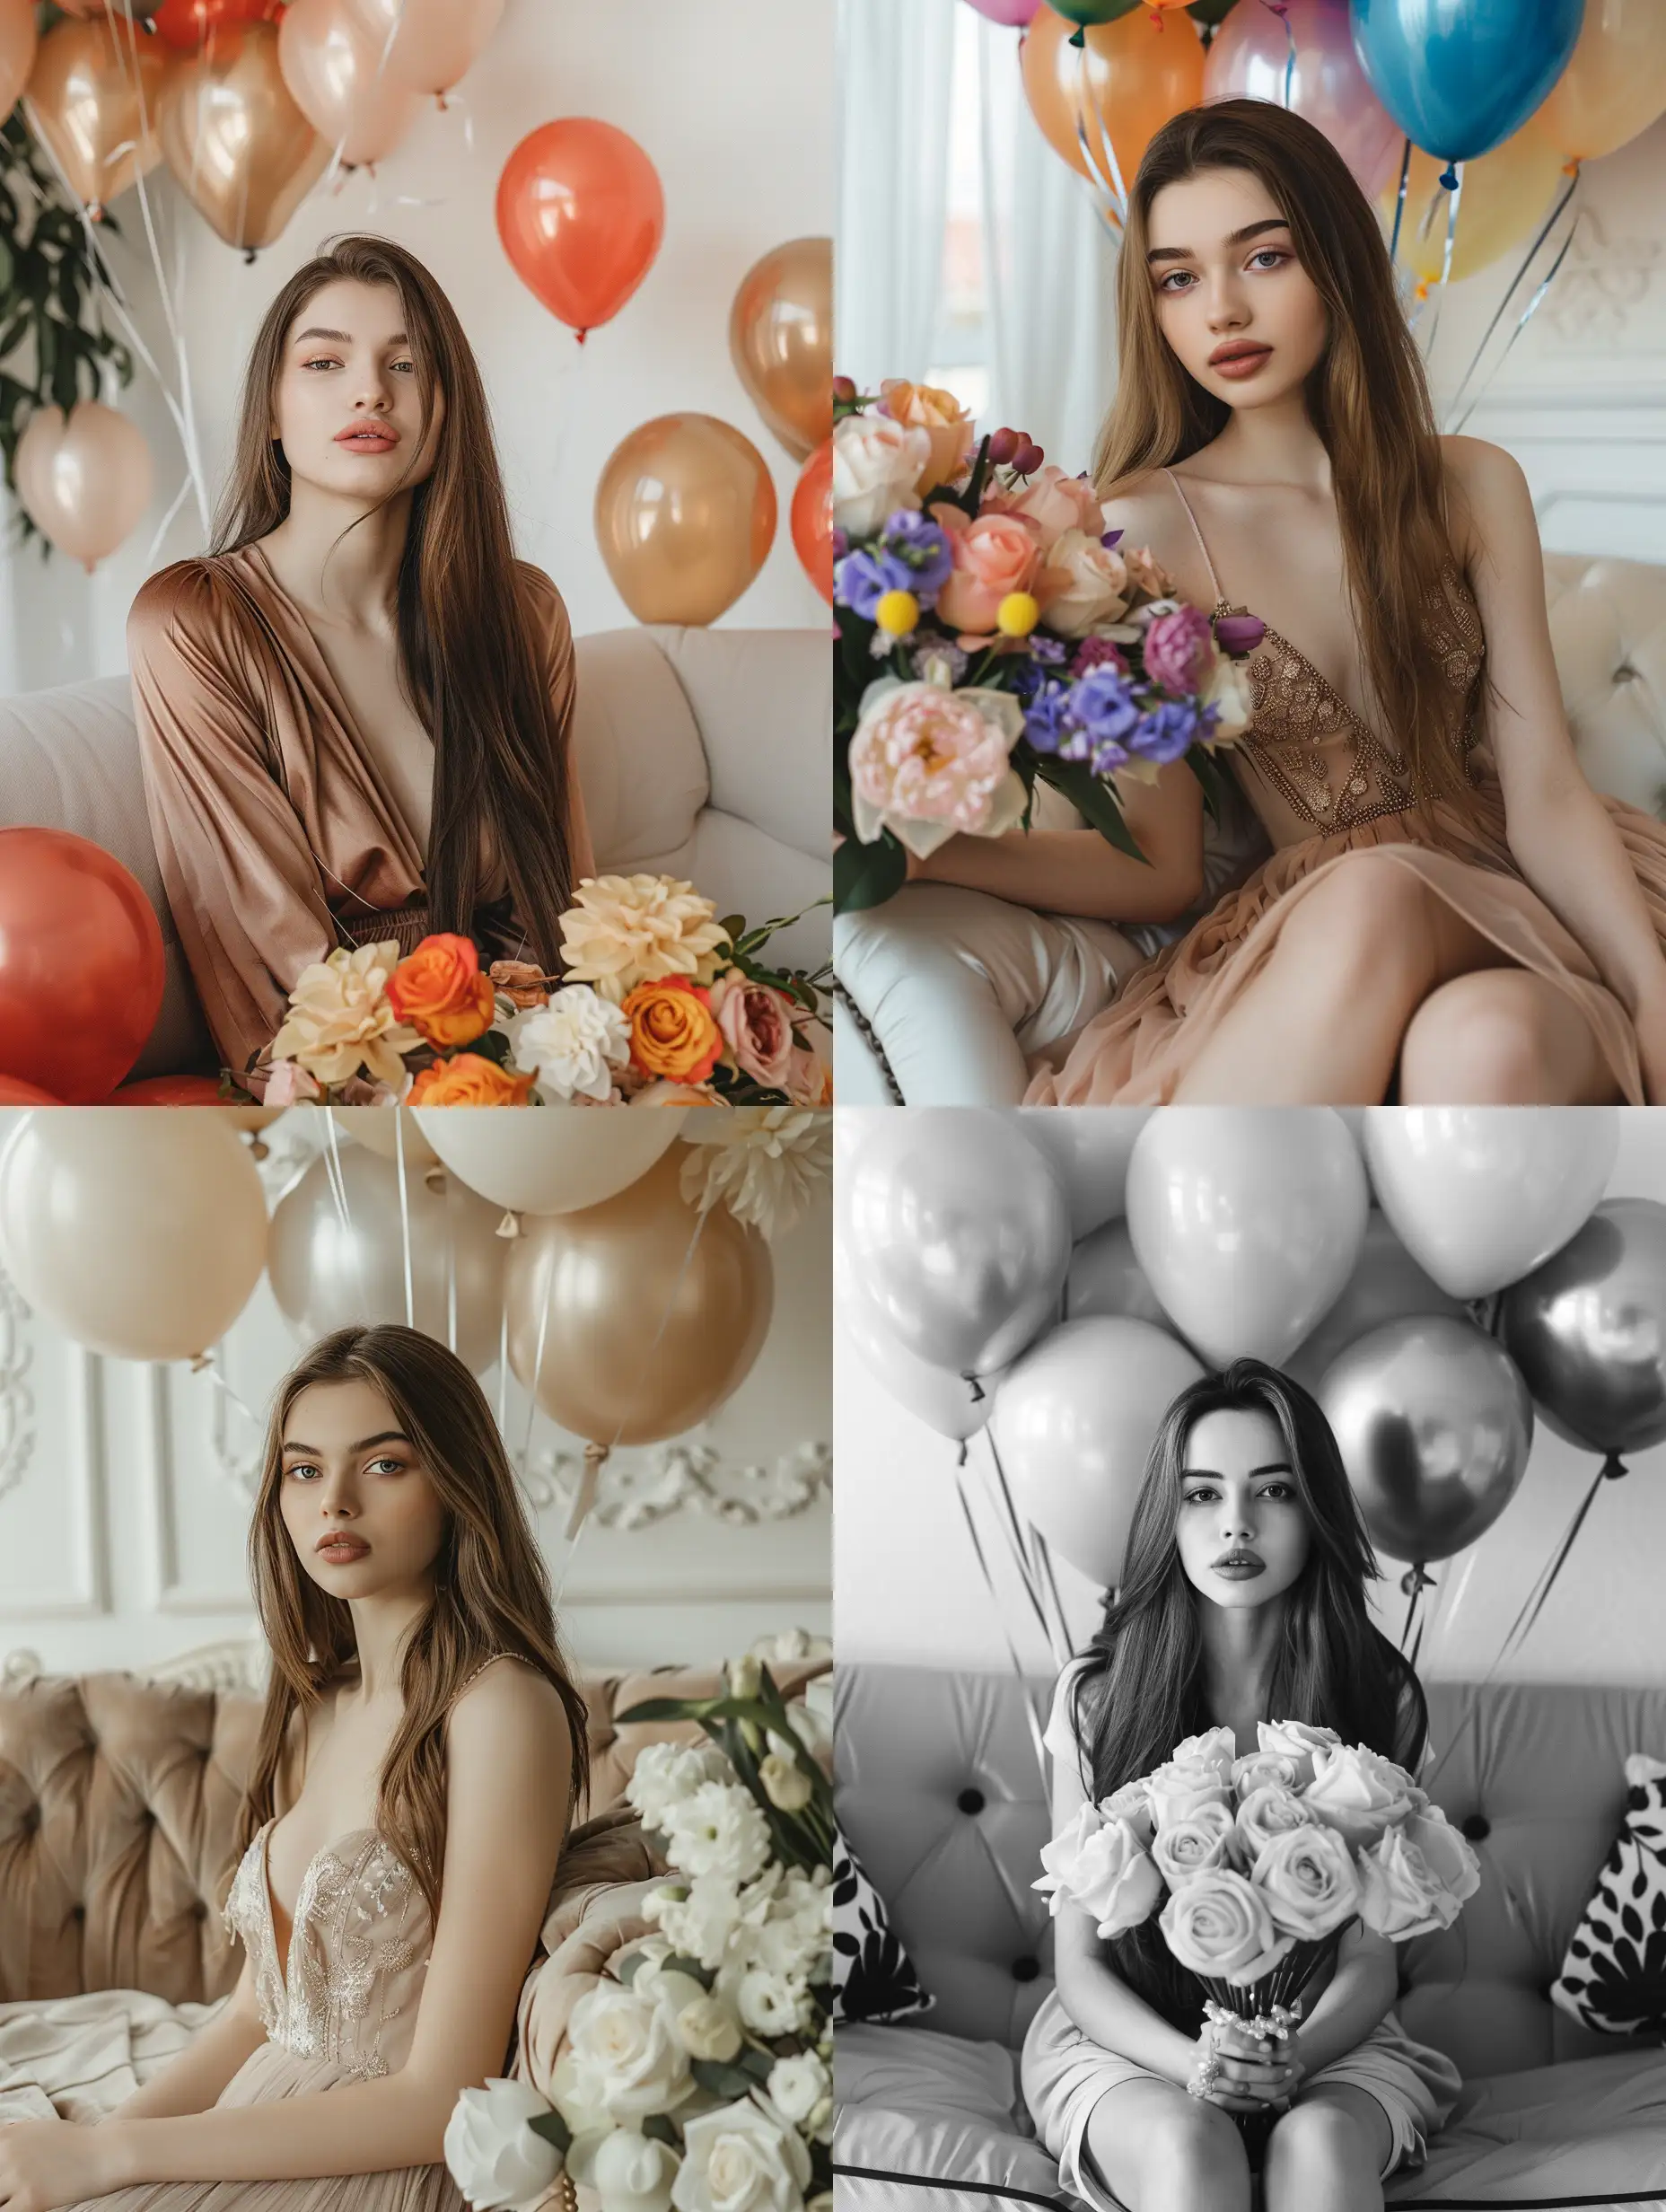 Woman-with-Long-Hair-Holding-Bouquet-of-Flowers-on-Birthday-with-Balloons